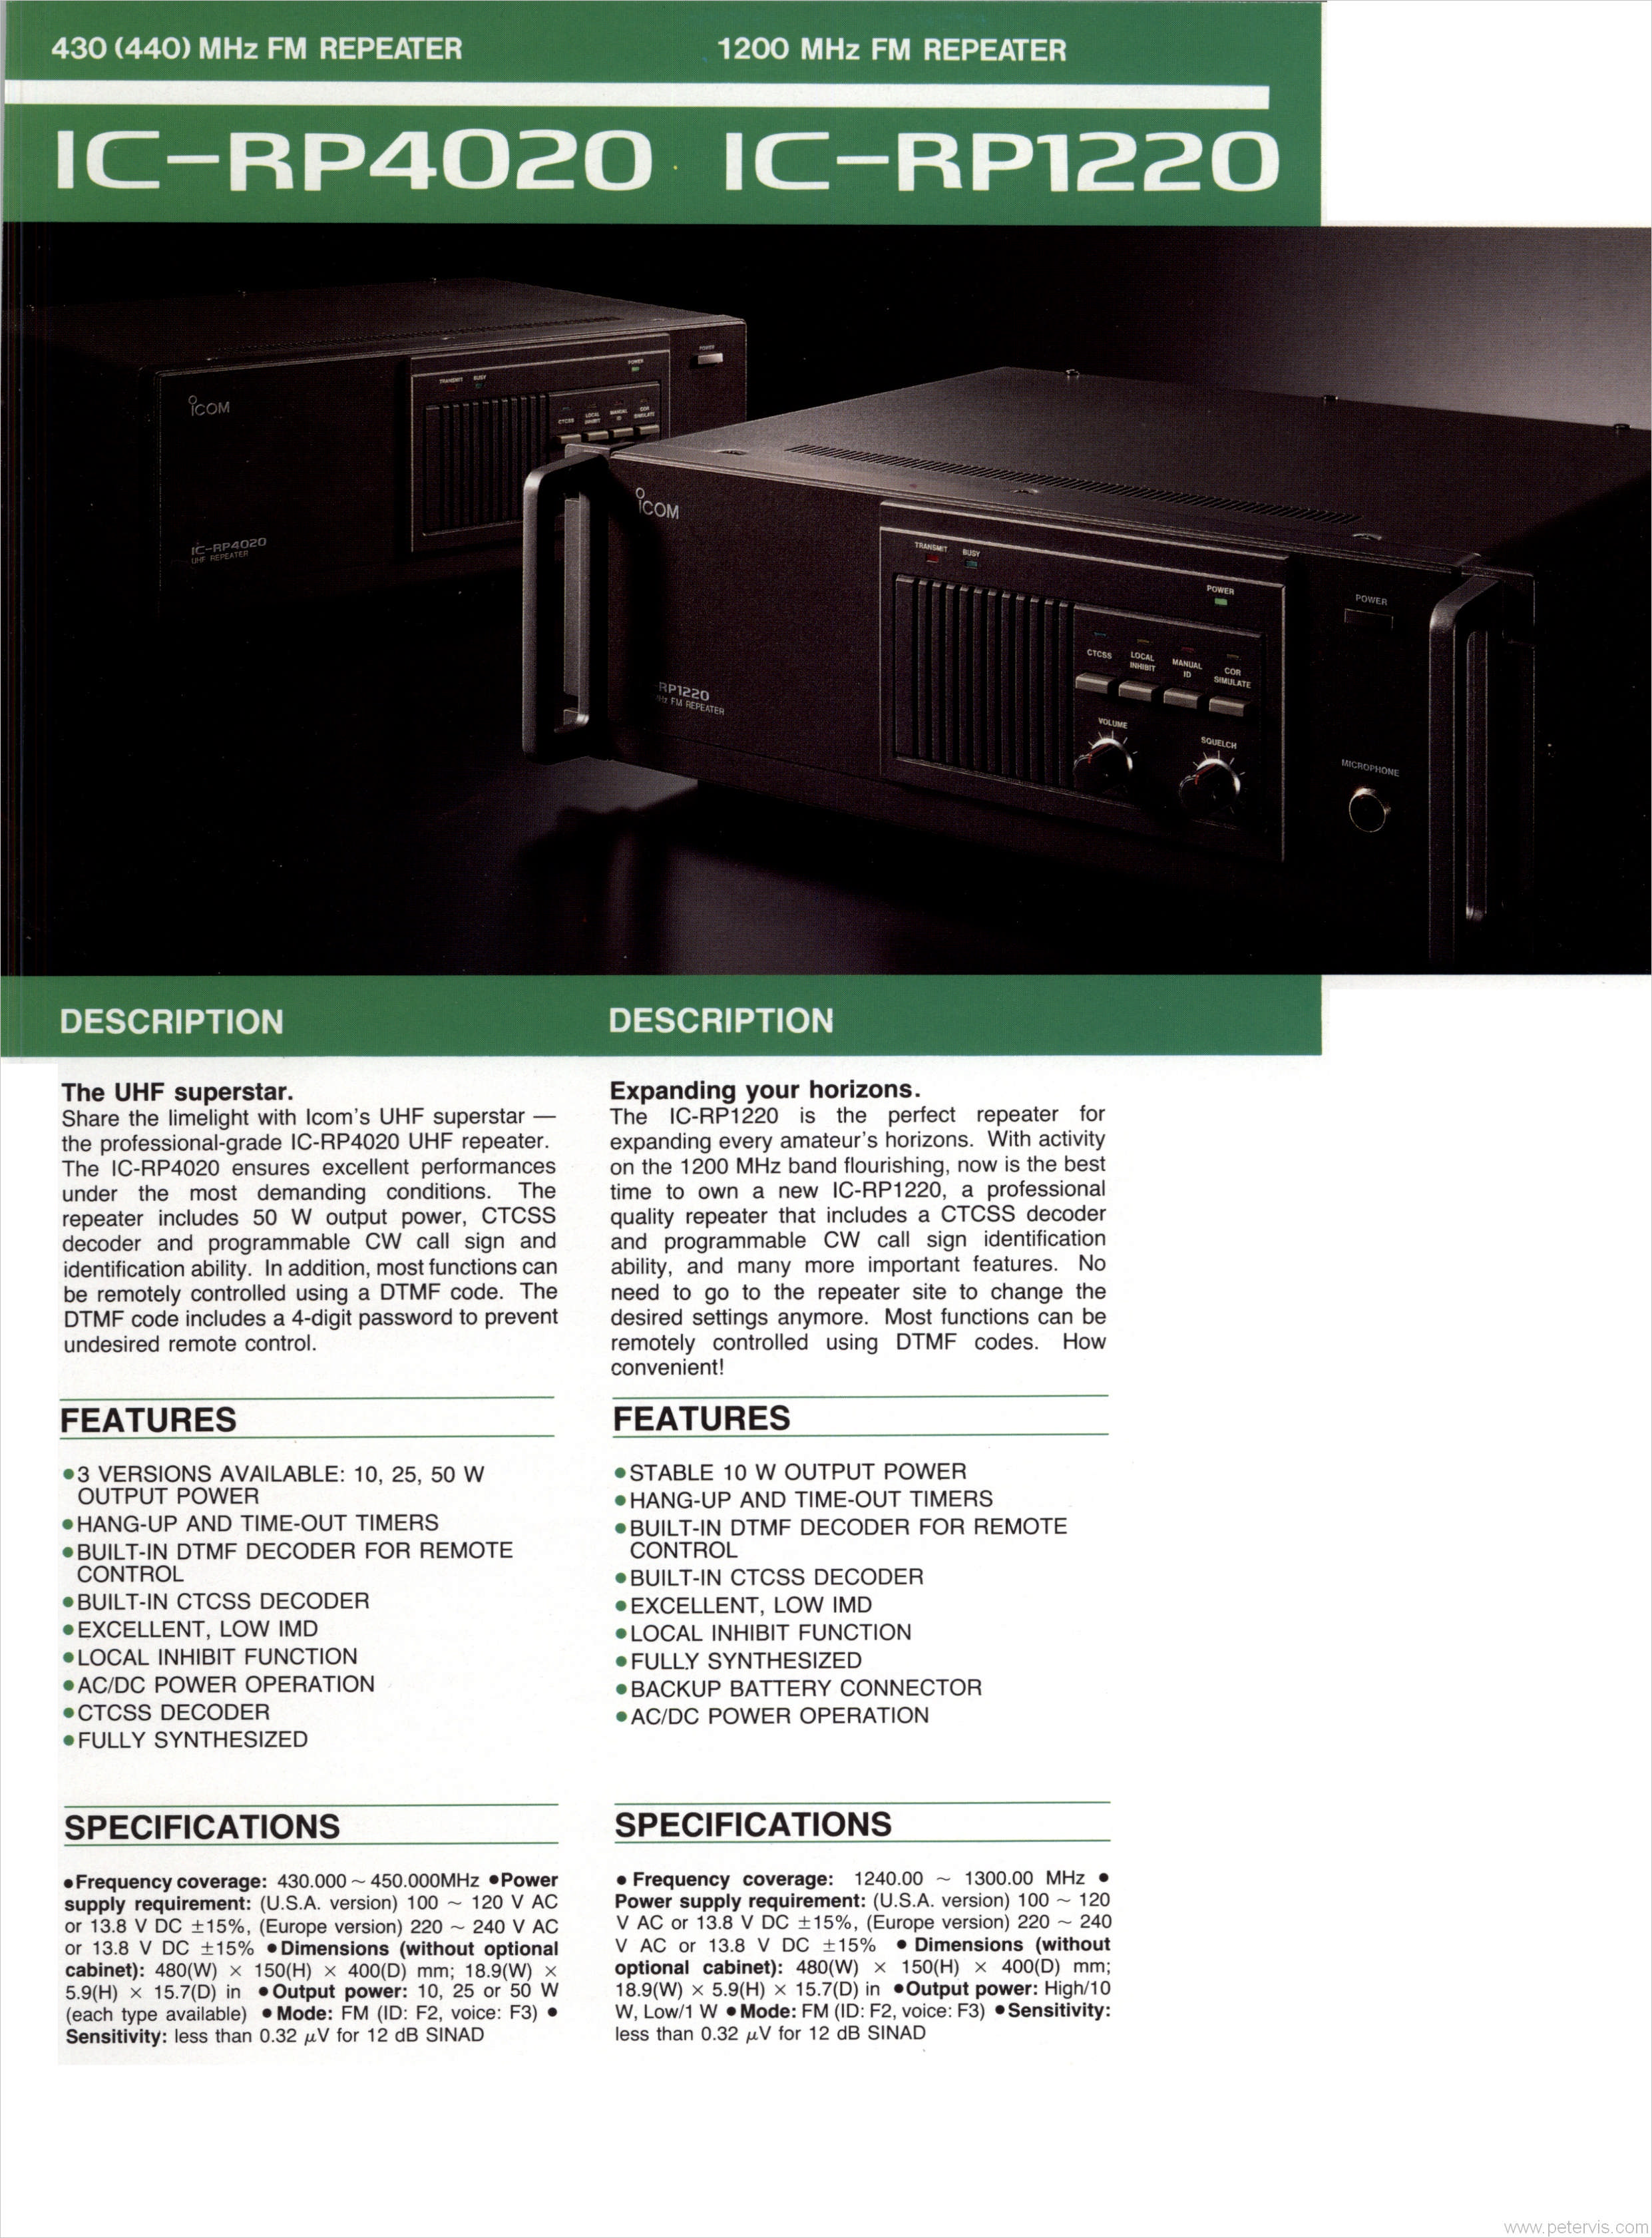 IC-RP4020 and IC-RP1220 SPECIFICATION and FEATURES